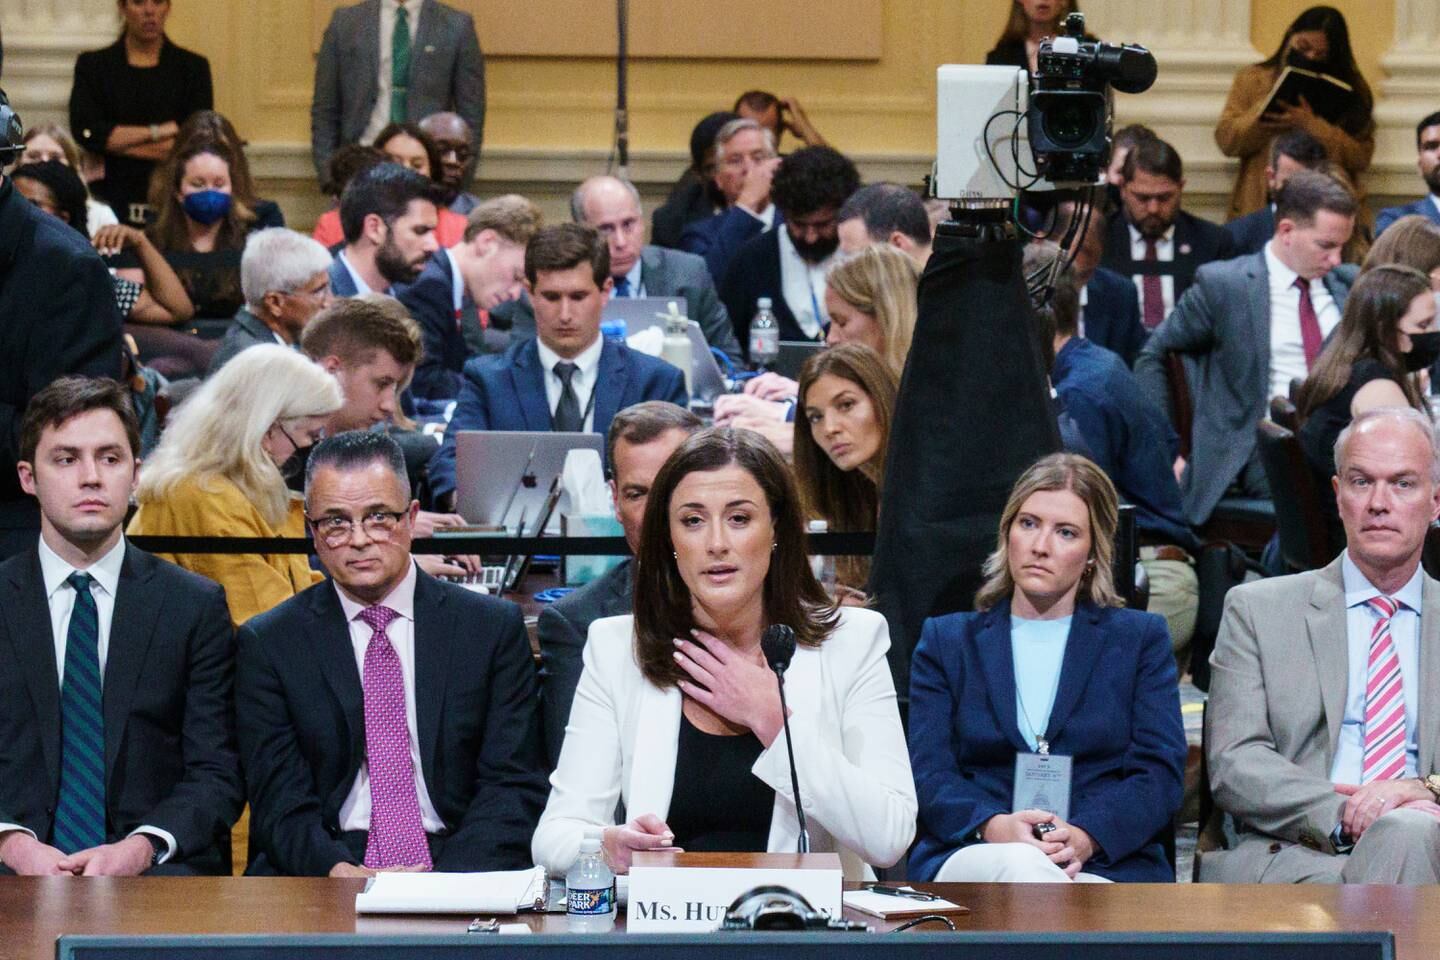 Cassidy Hutchinson describes the actions of former US president Donald Trump during a House Select Committee hearing, in the Cannon House Office Building on Capitol Hill in Washington, on June 28. EPA / Pool